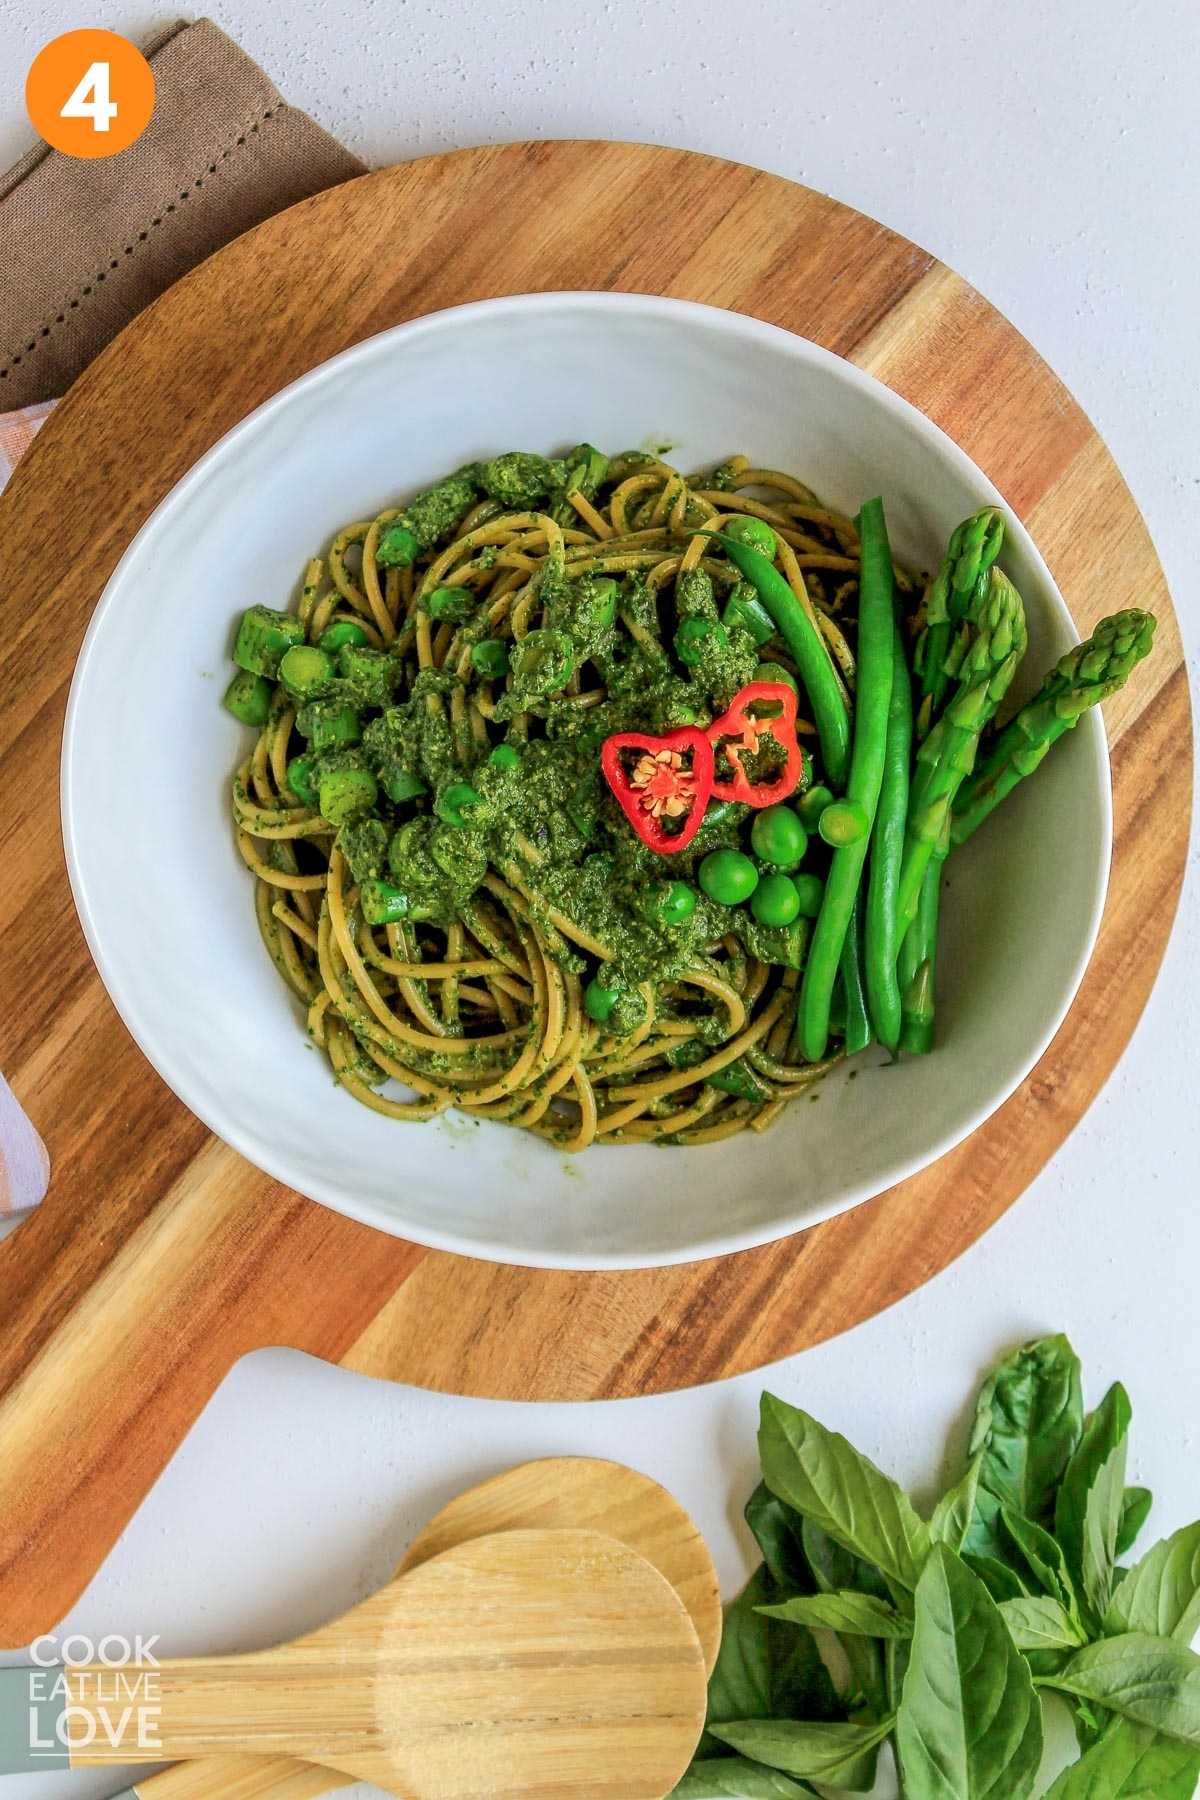 Green spaghetti served up in a bowl topped with veggies.